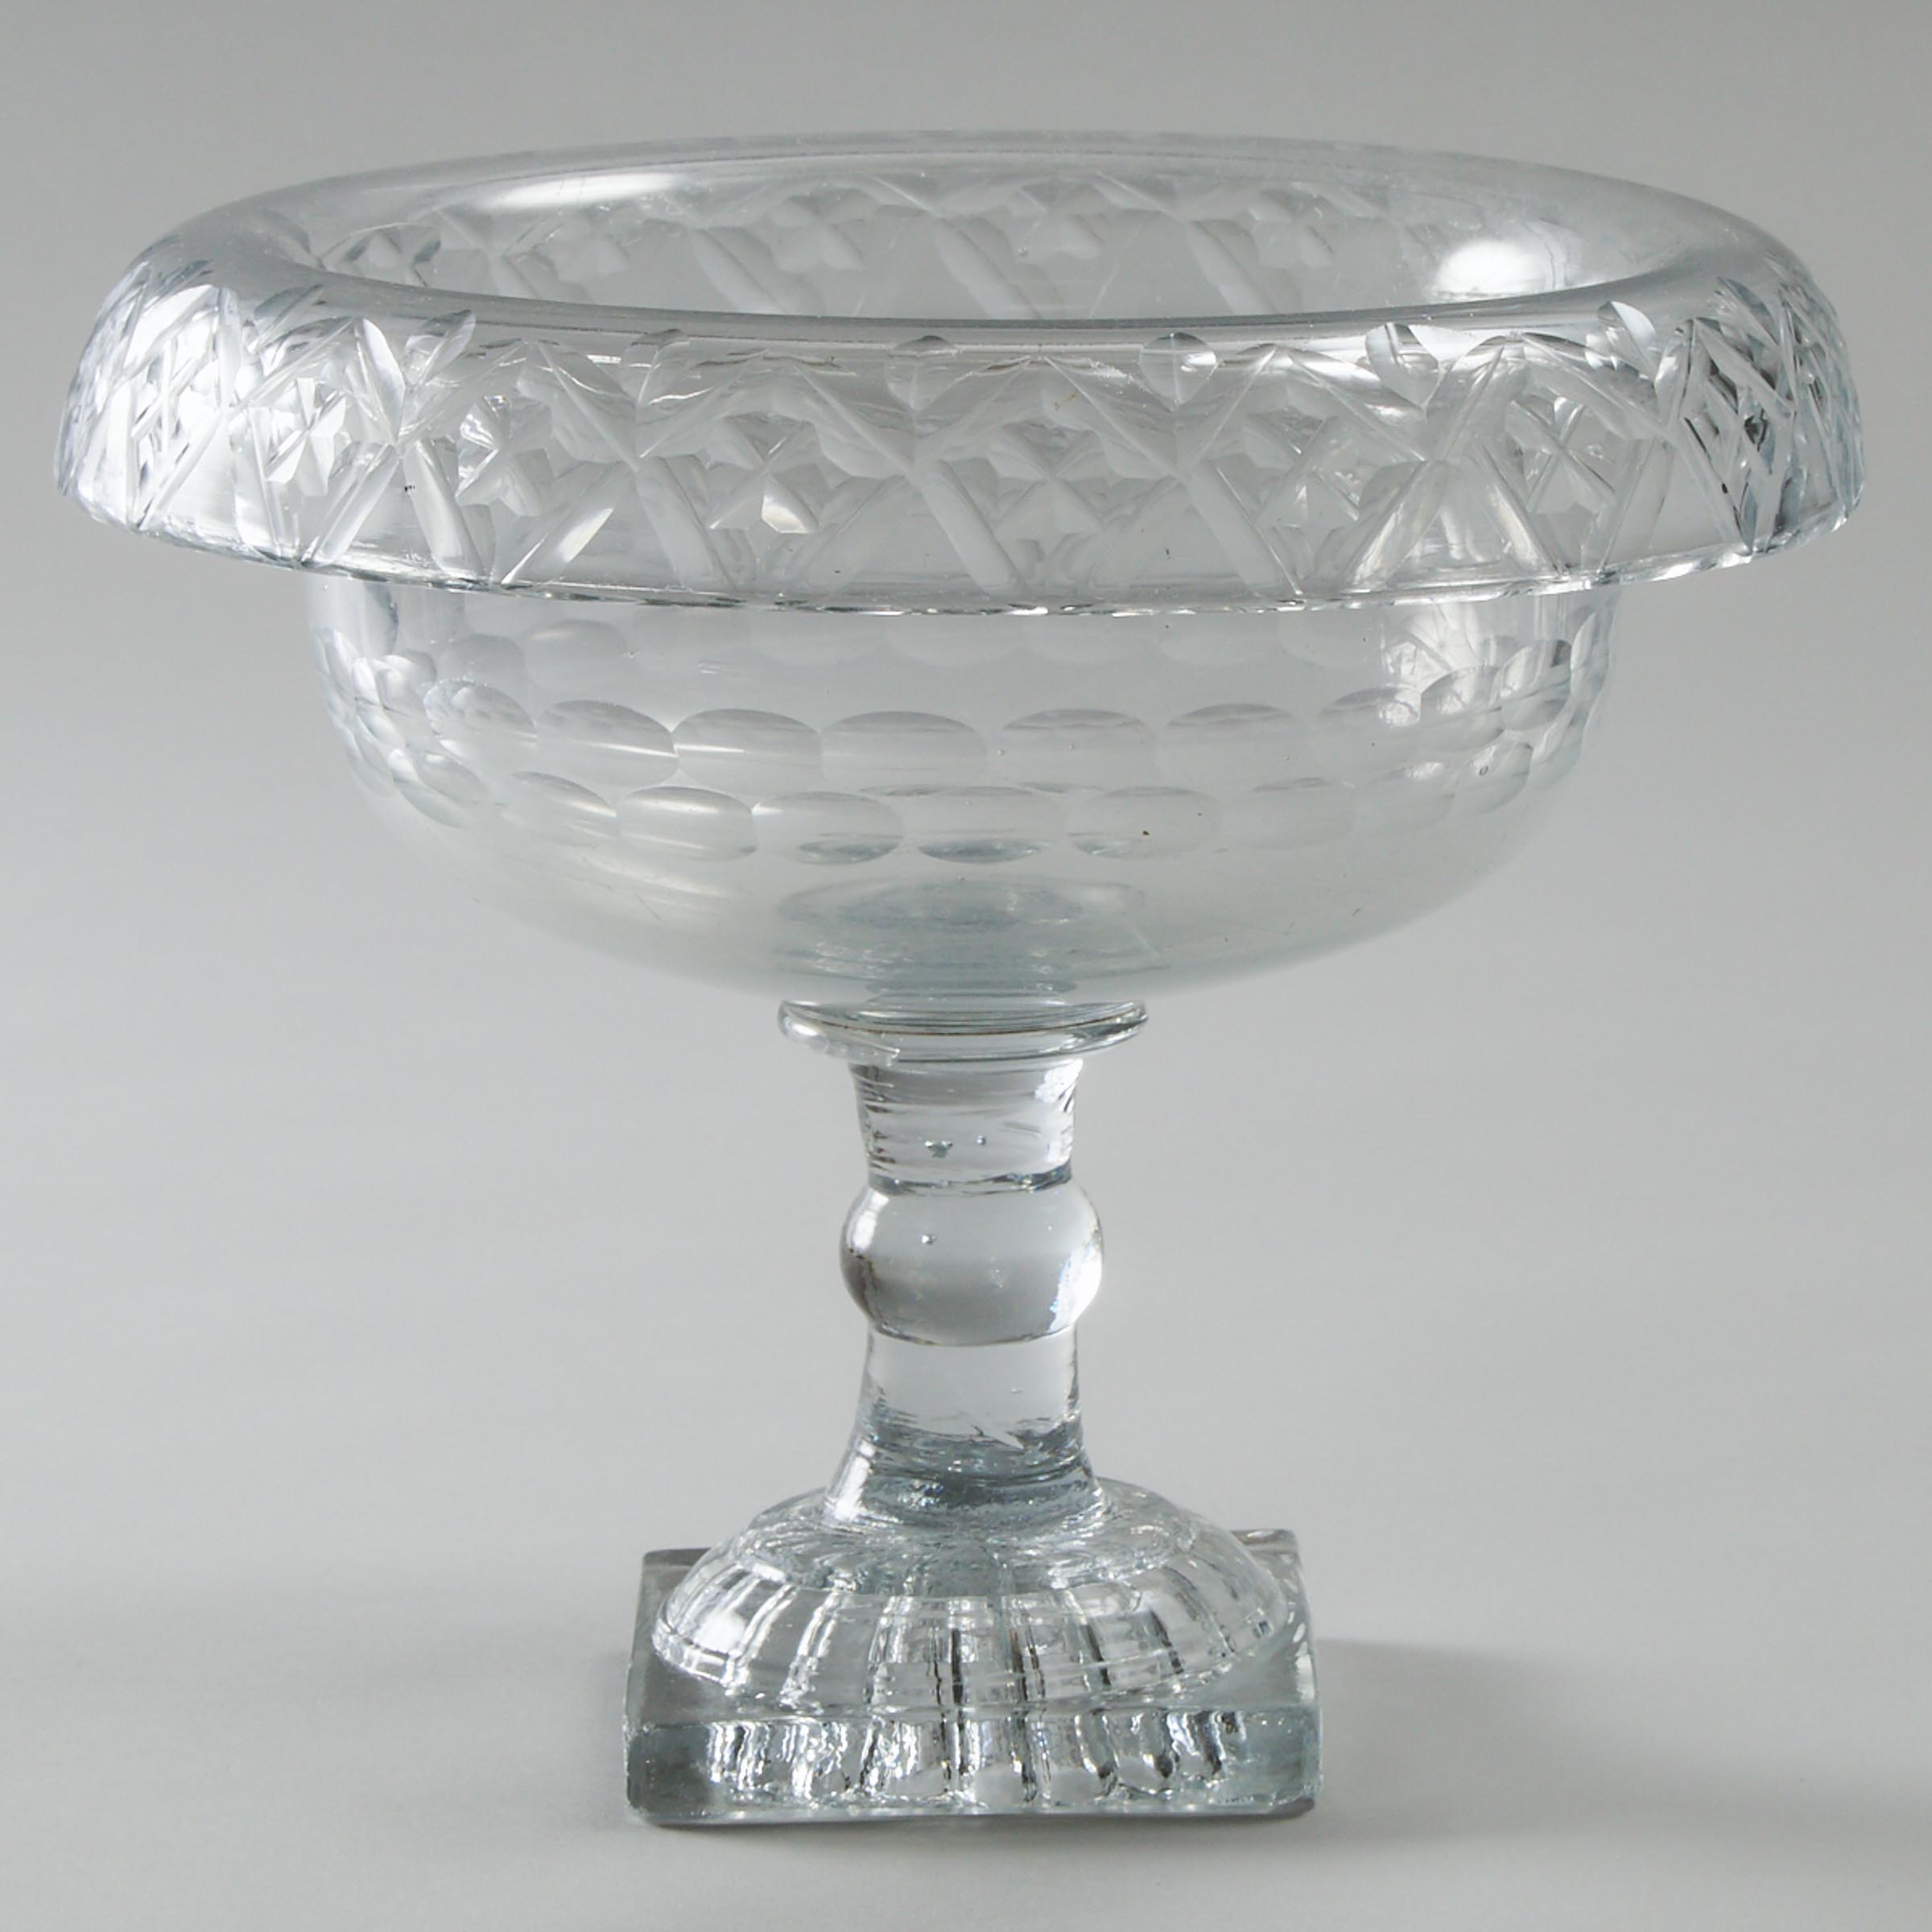 Anglo-Irish Cut Glass Pedestal-Footed Bowl, early 19th century